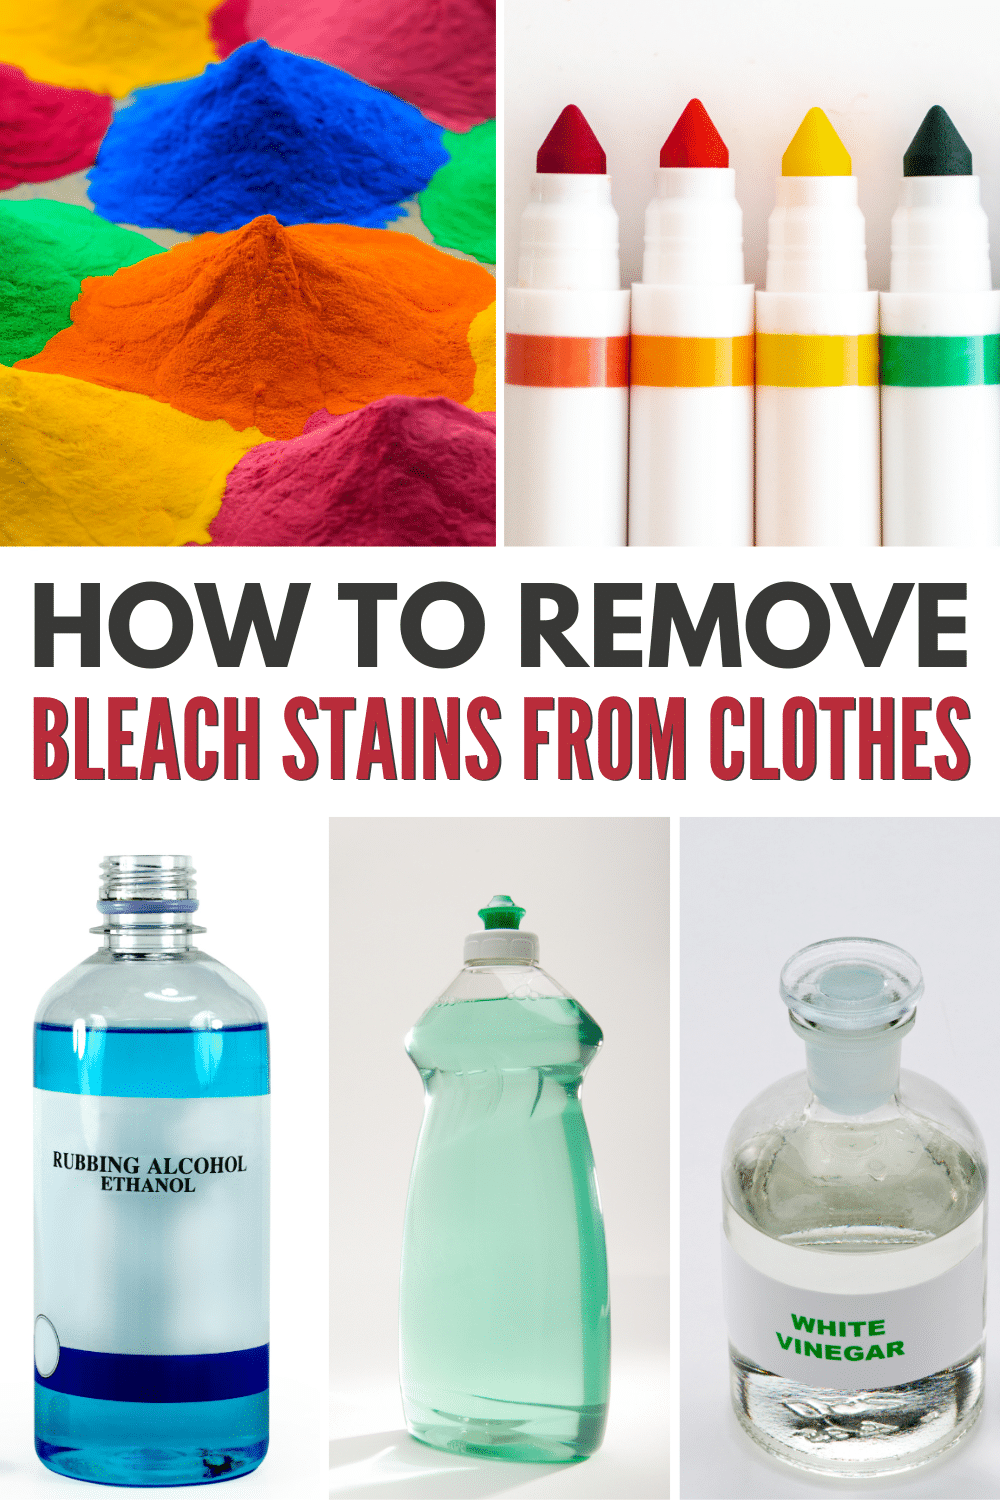 How to remove bleach stains from clothes.